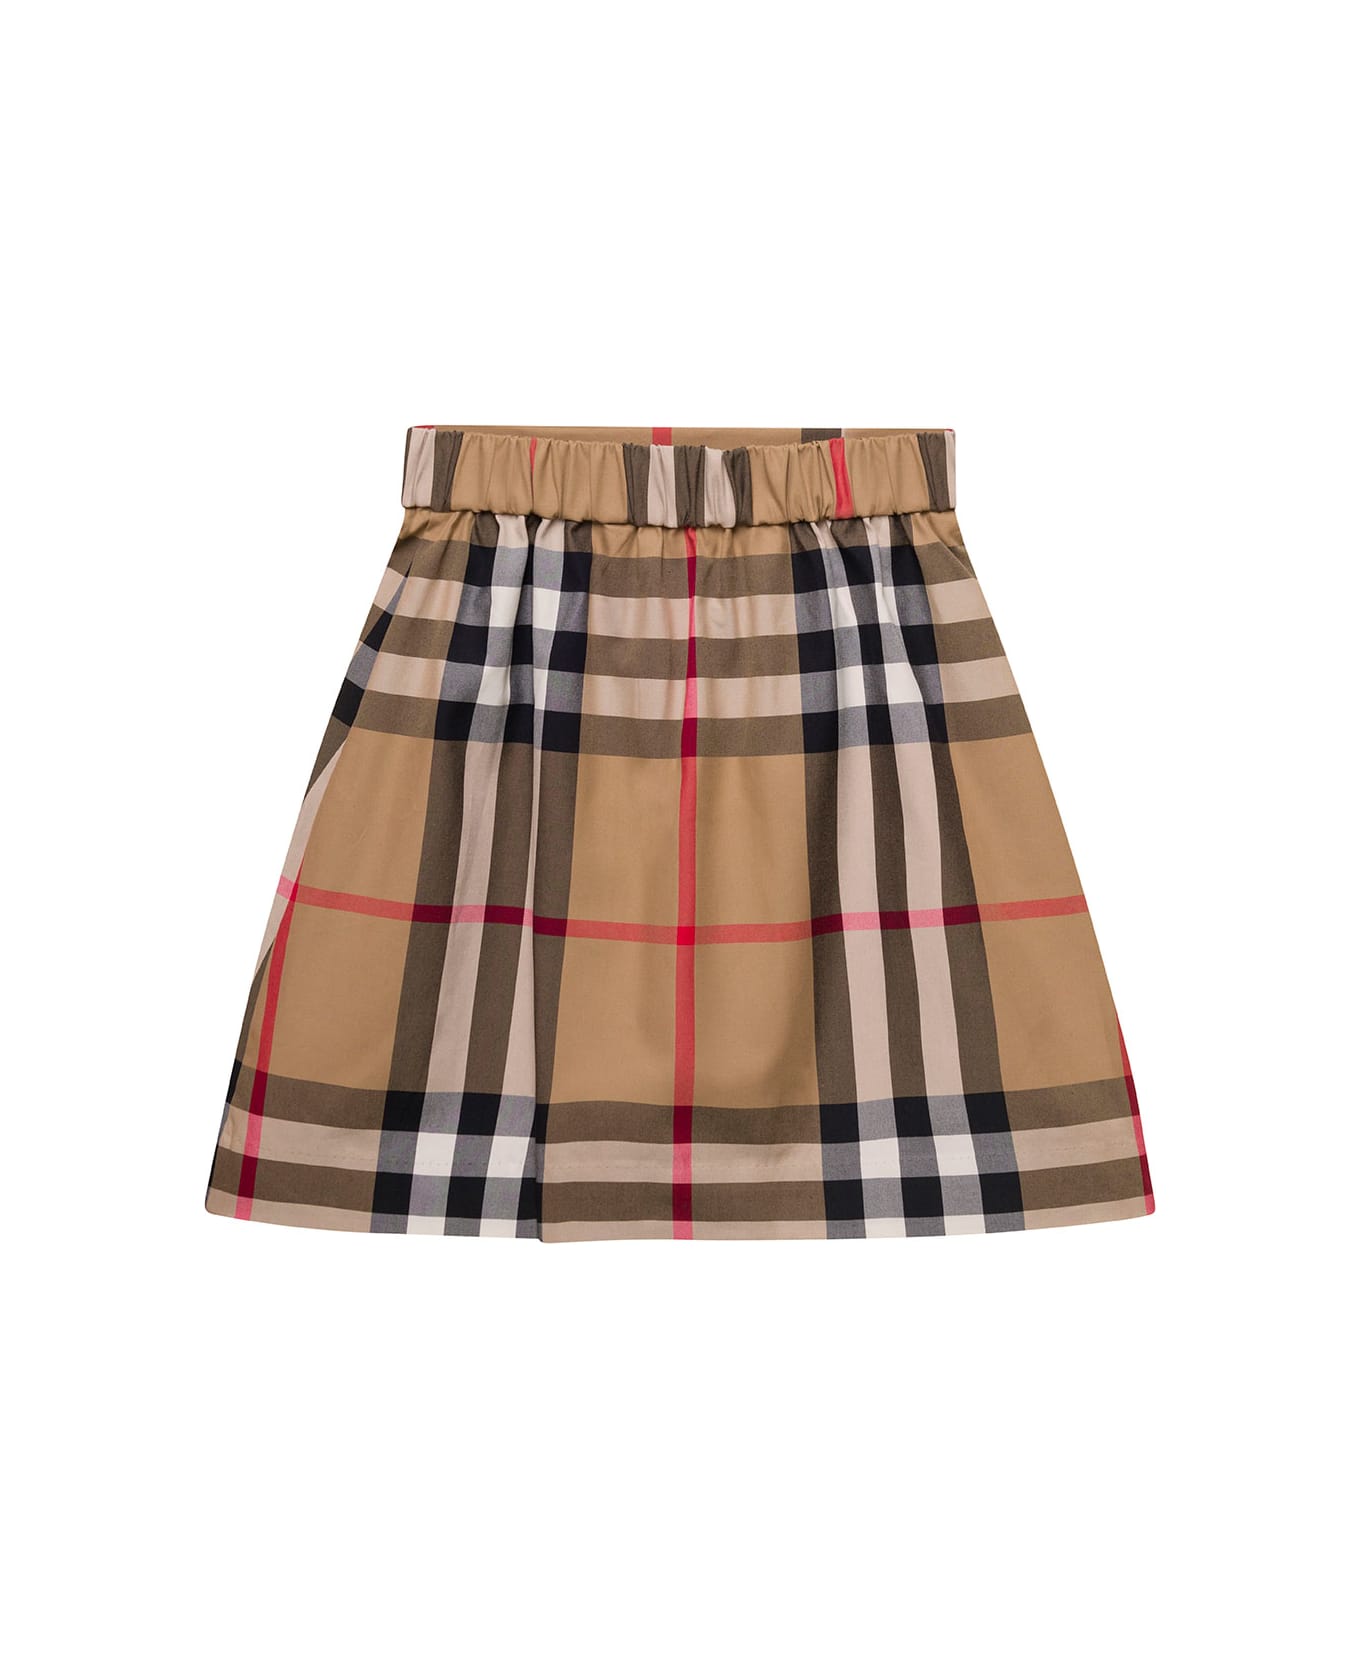 Burberry 'anjelica' Beige Mini Skirt With Vintage Check Motif In Cotton Girl - Archive beige ip chk ボトムス